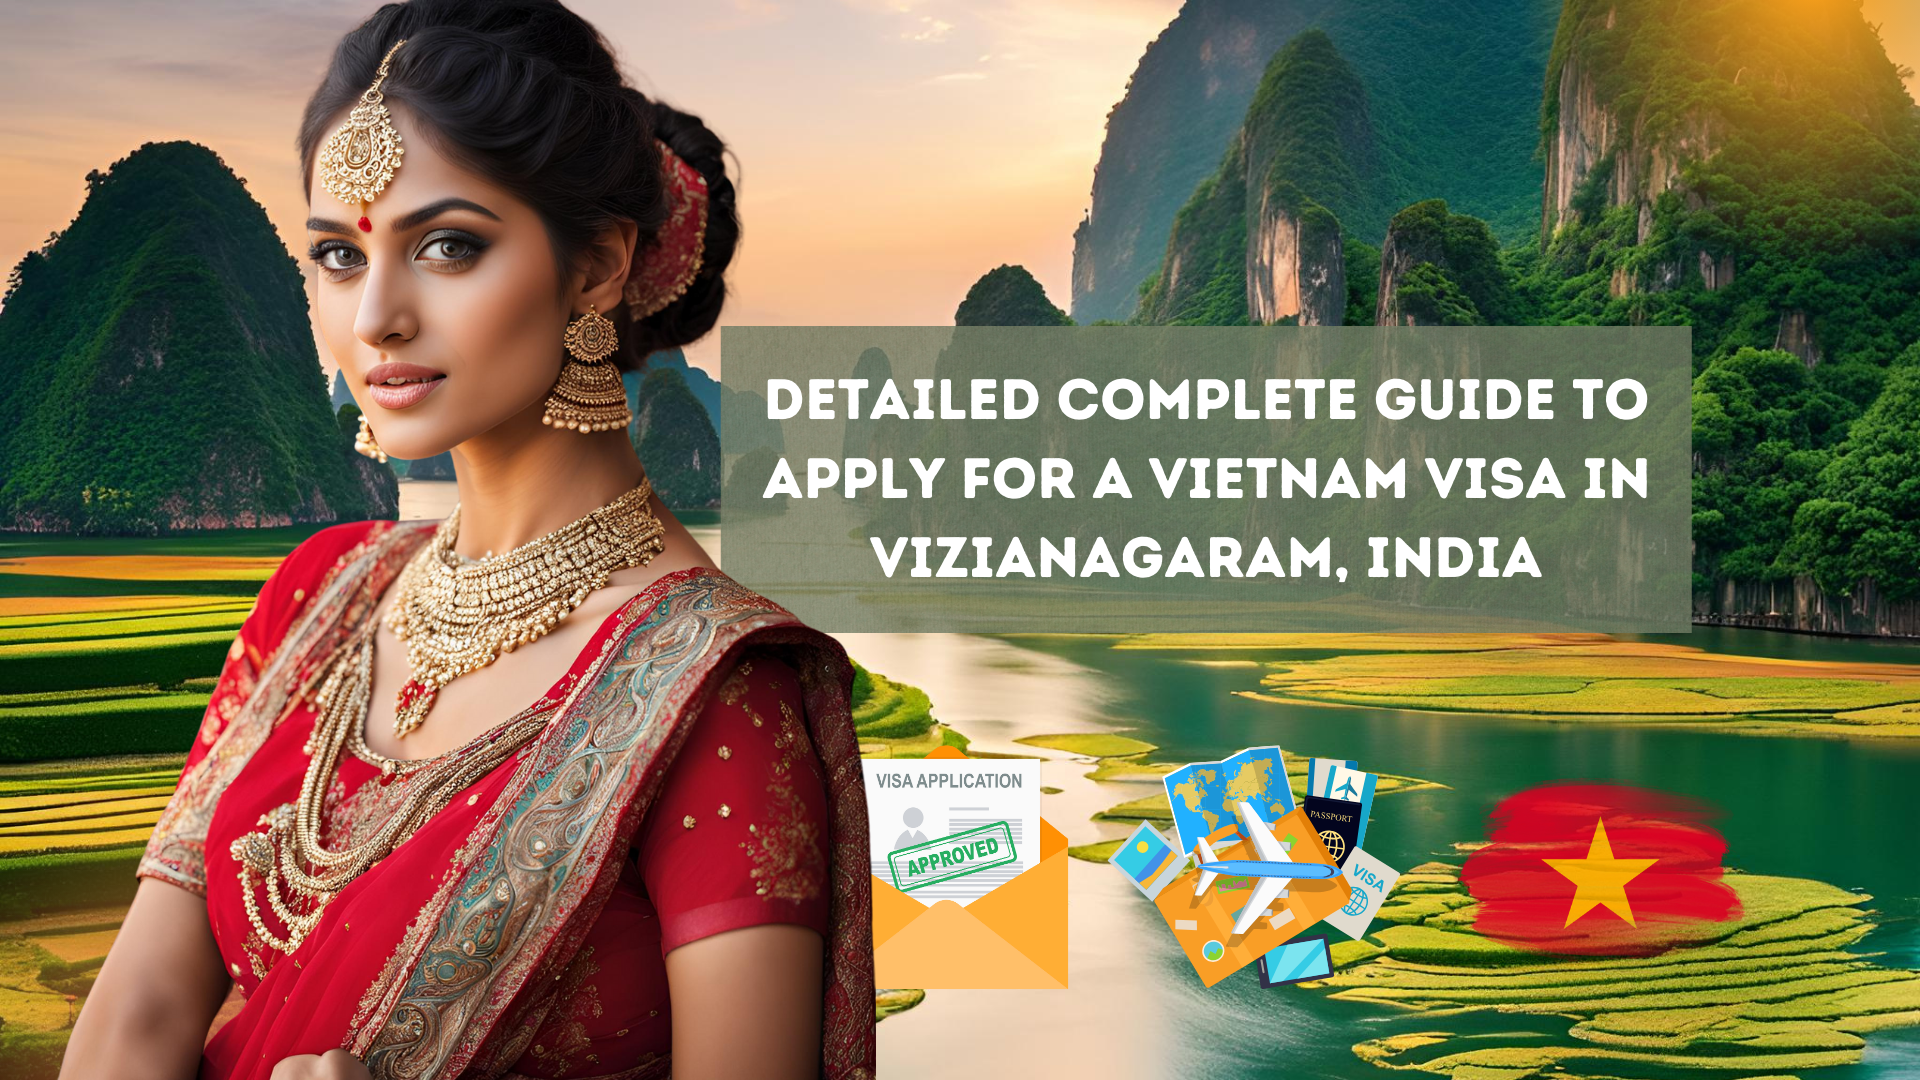 Detailed Complete Guide to Apply for a Vietnam Visa in Vizianagaram, India